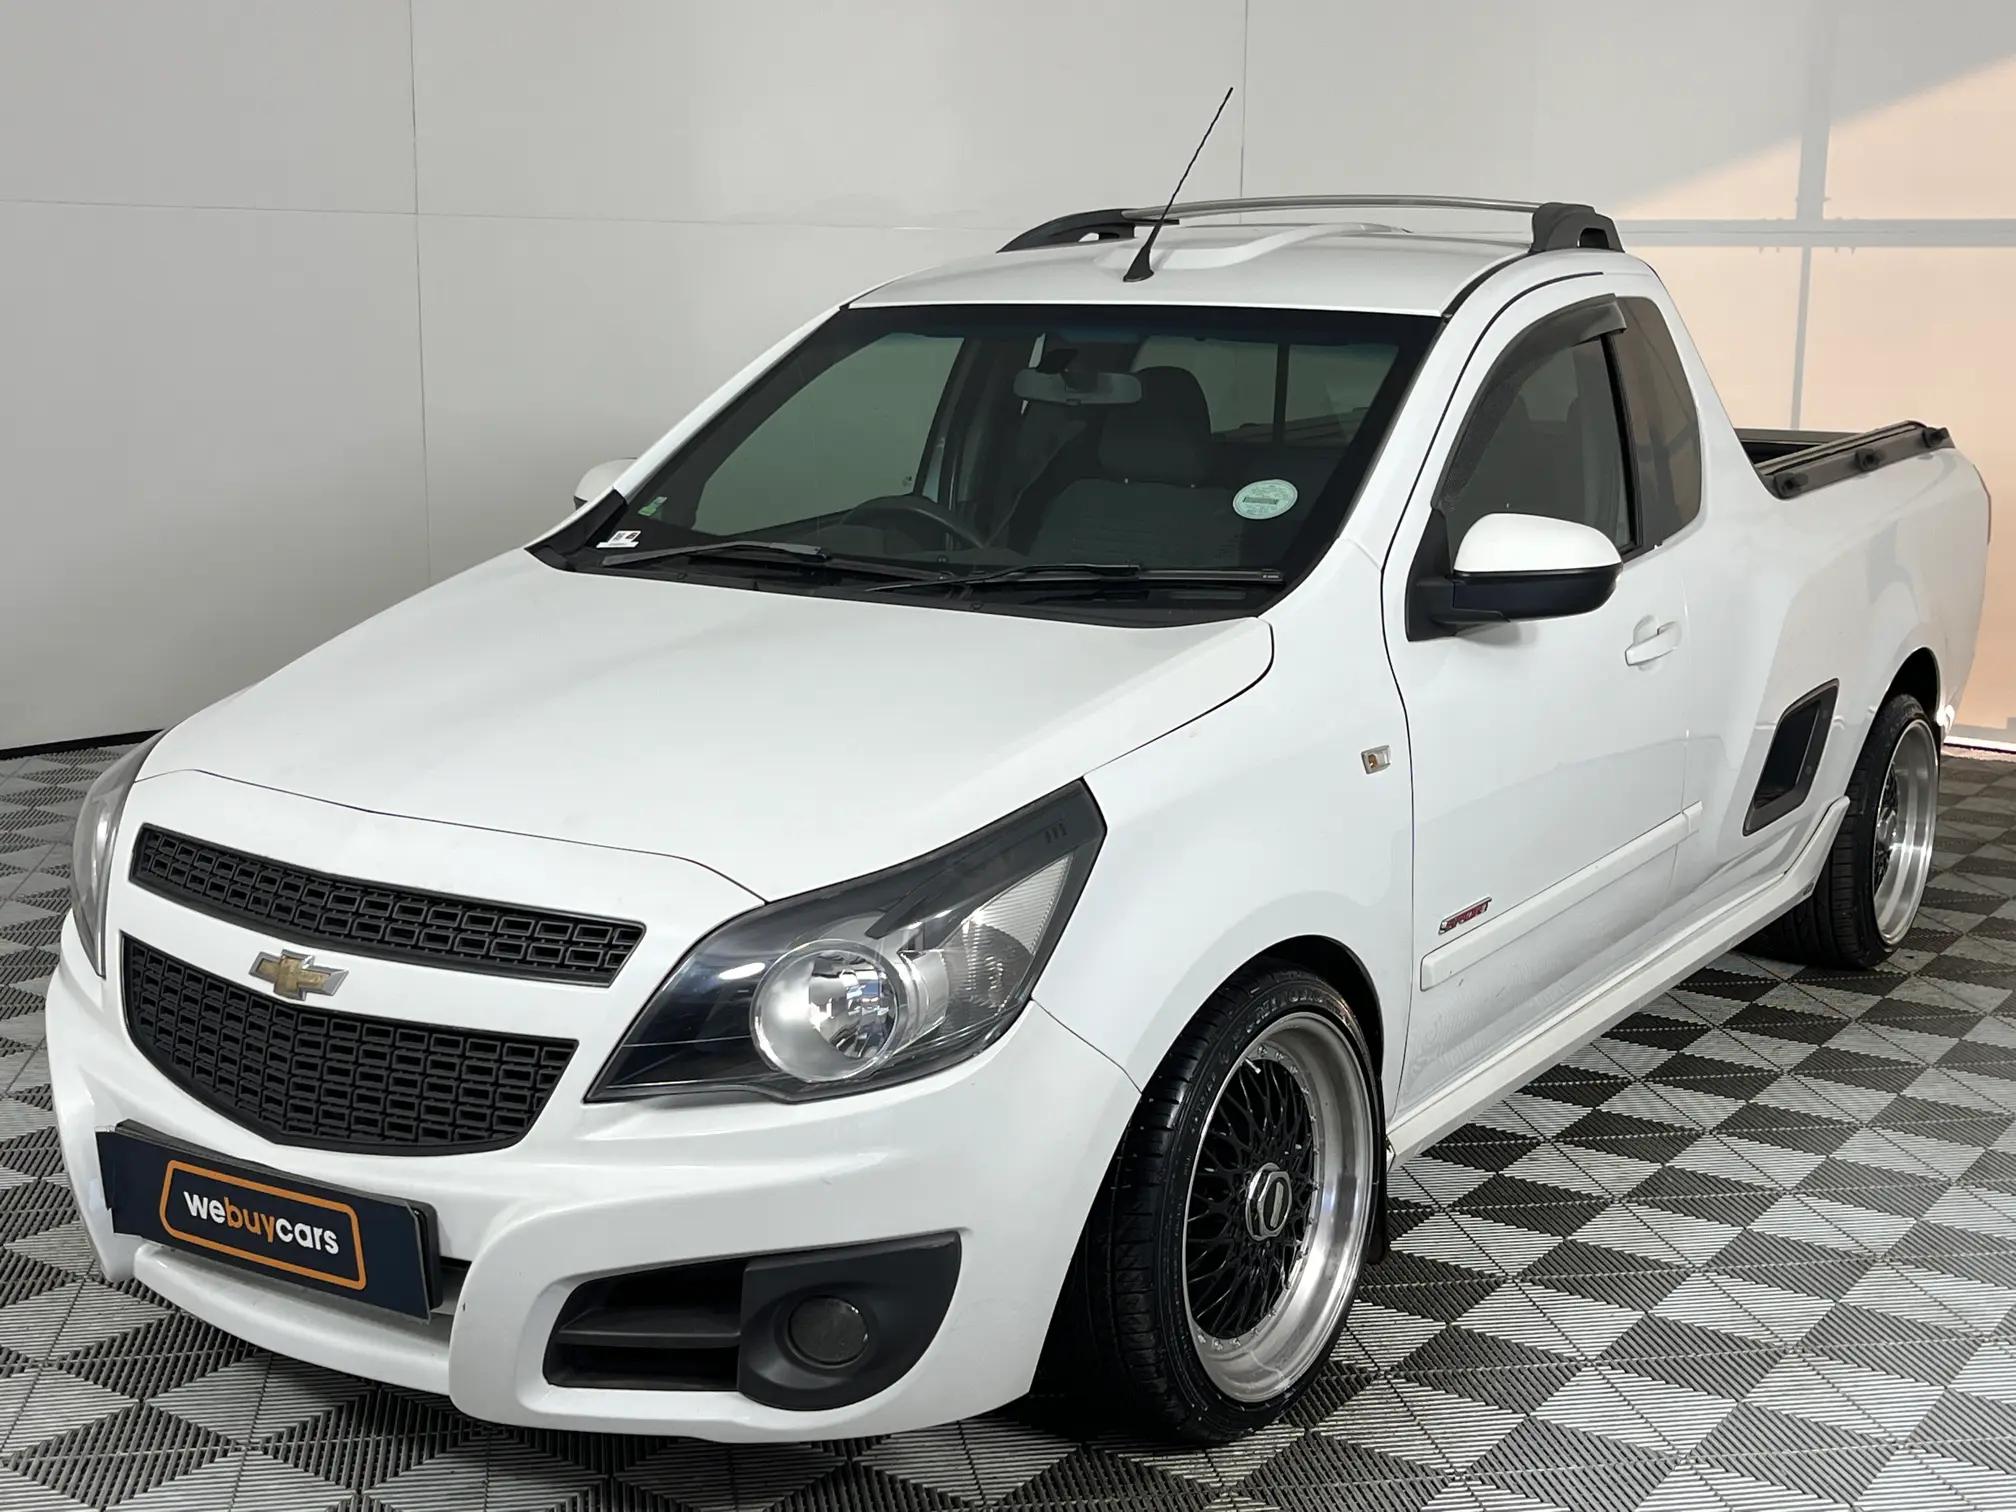 Chevrolet Utility 1.8 Sport for sale - R 123 900 | Carfind.co.za